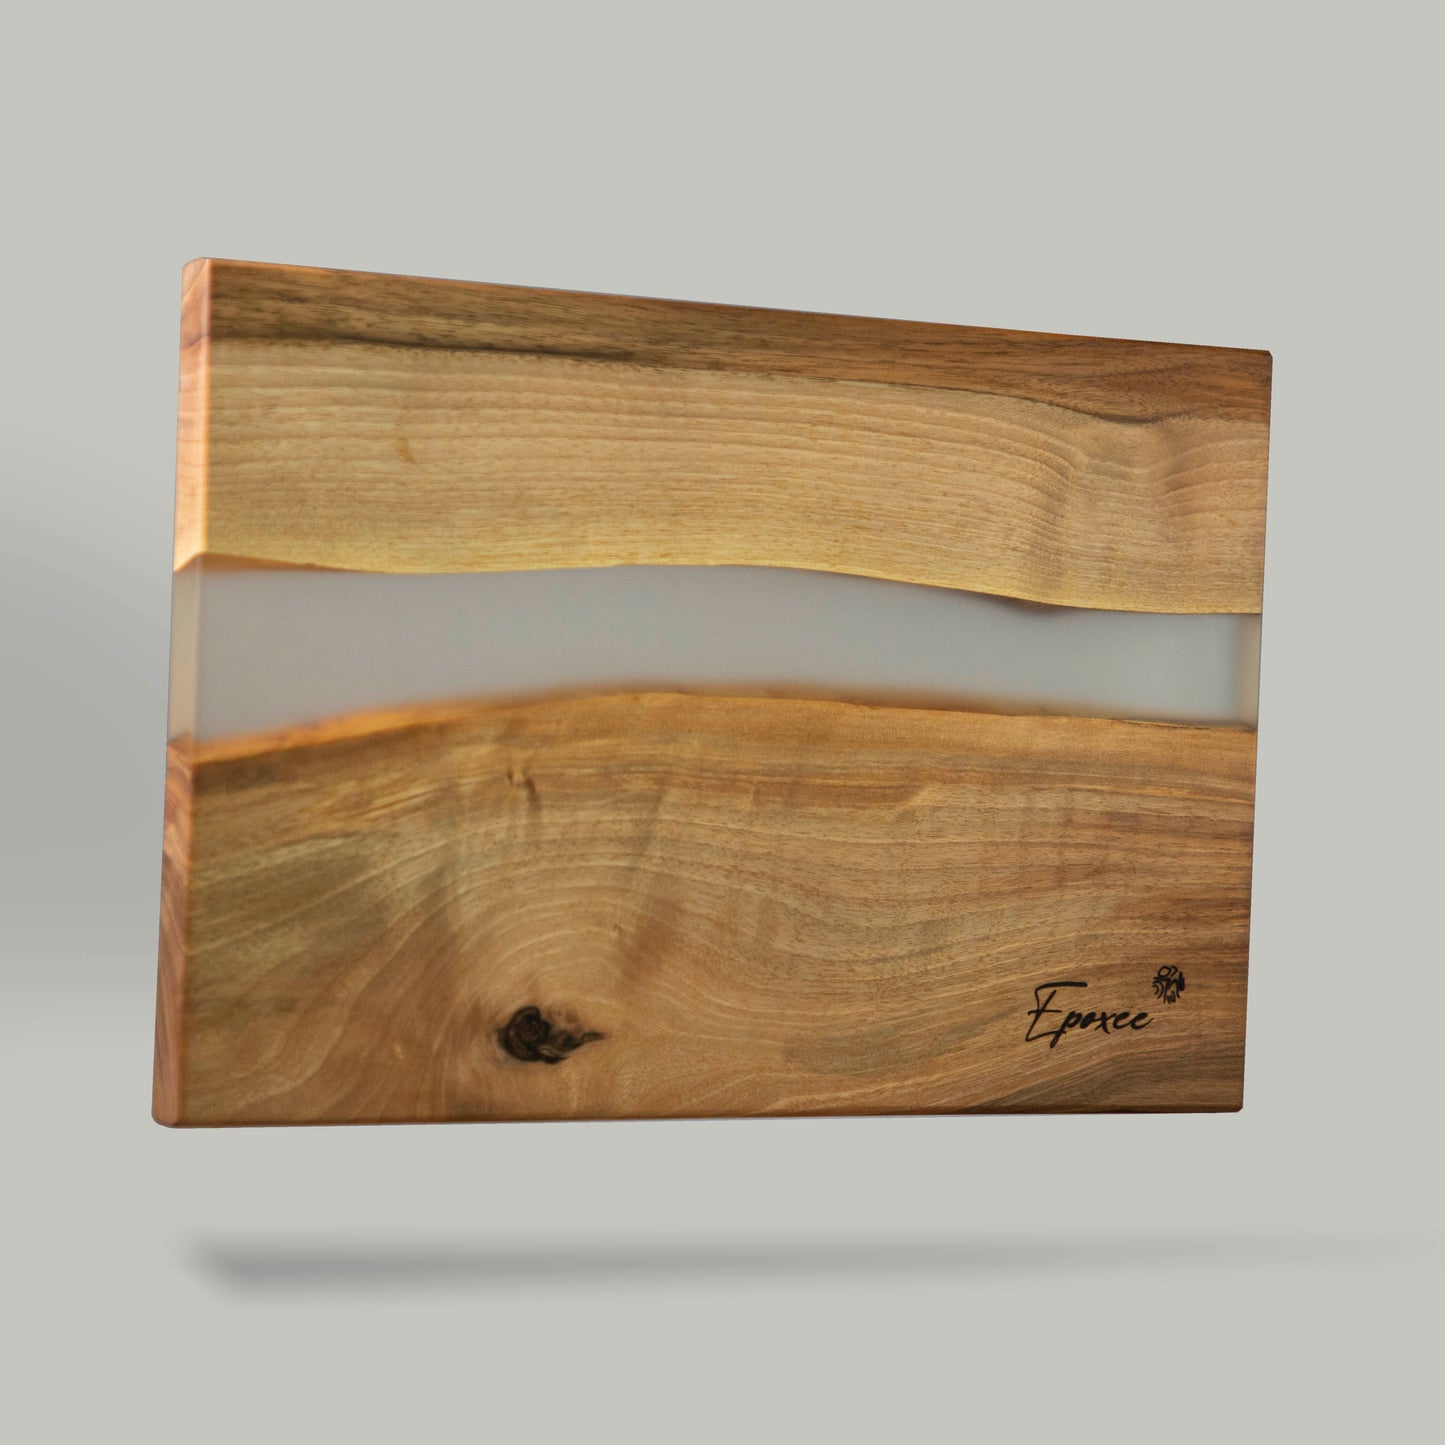 Serving board made from wood and epoxy resin in the color smoky crystal